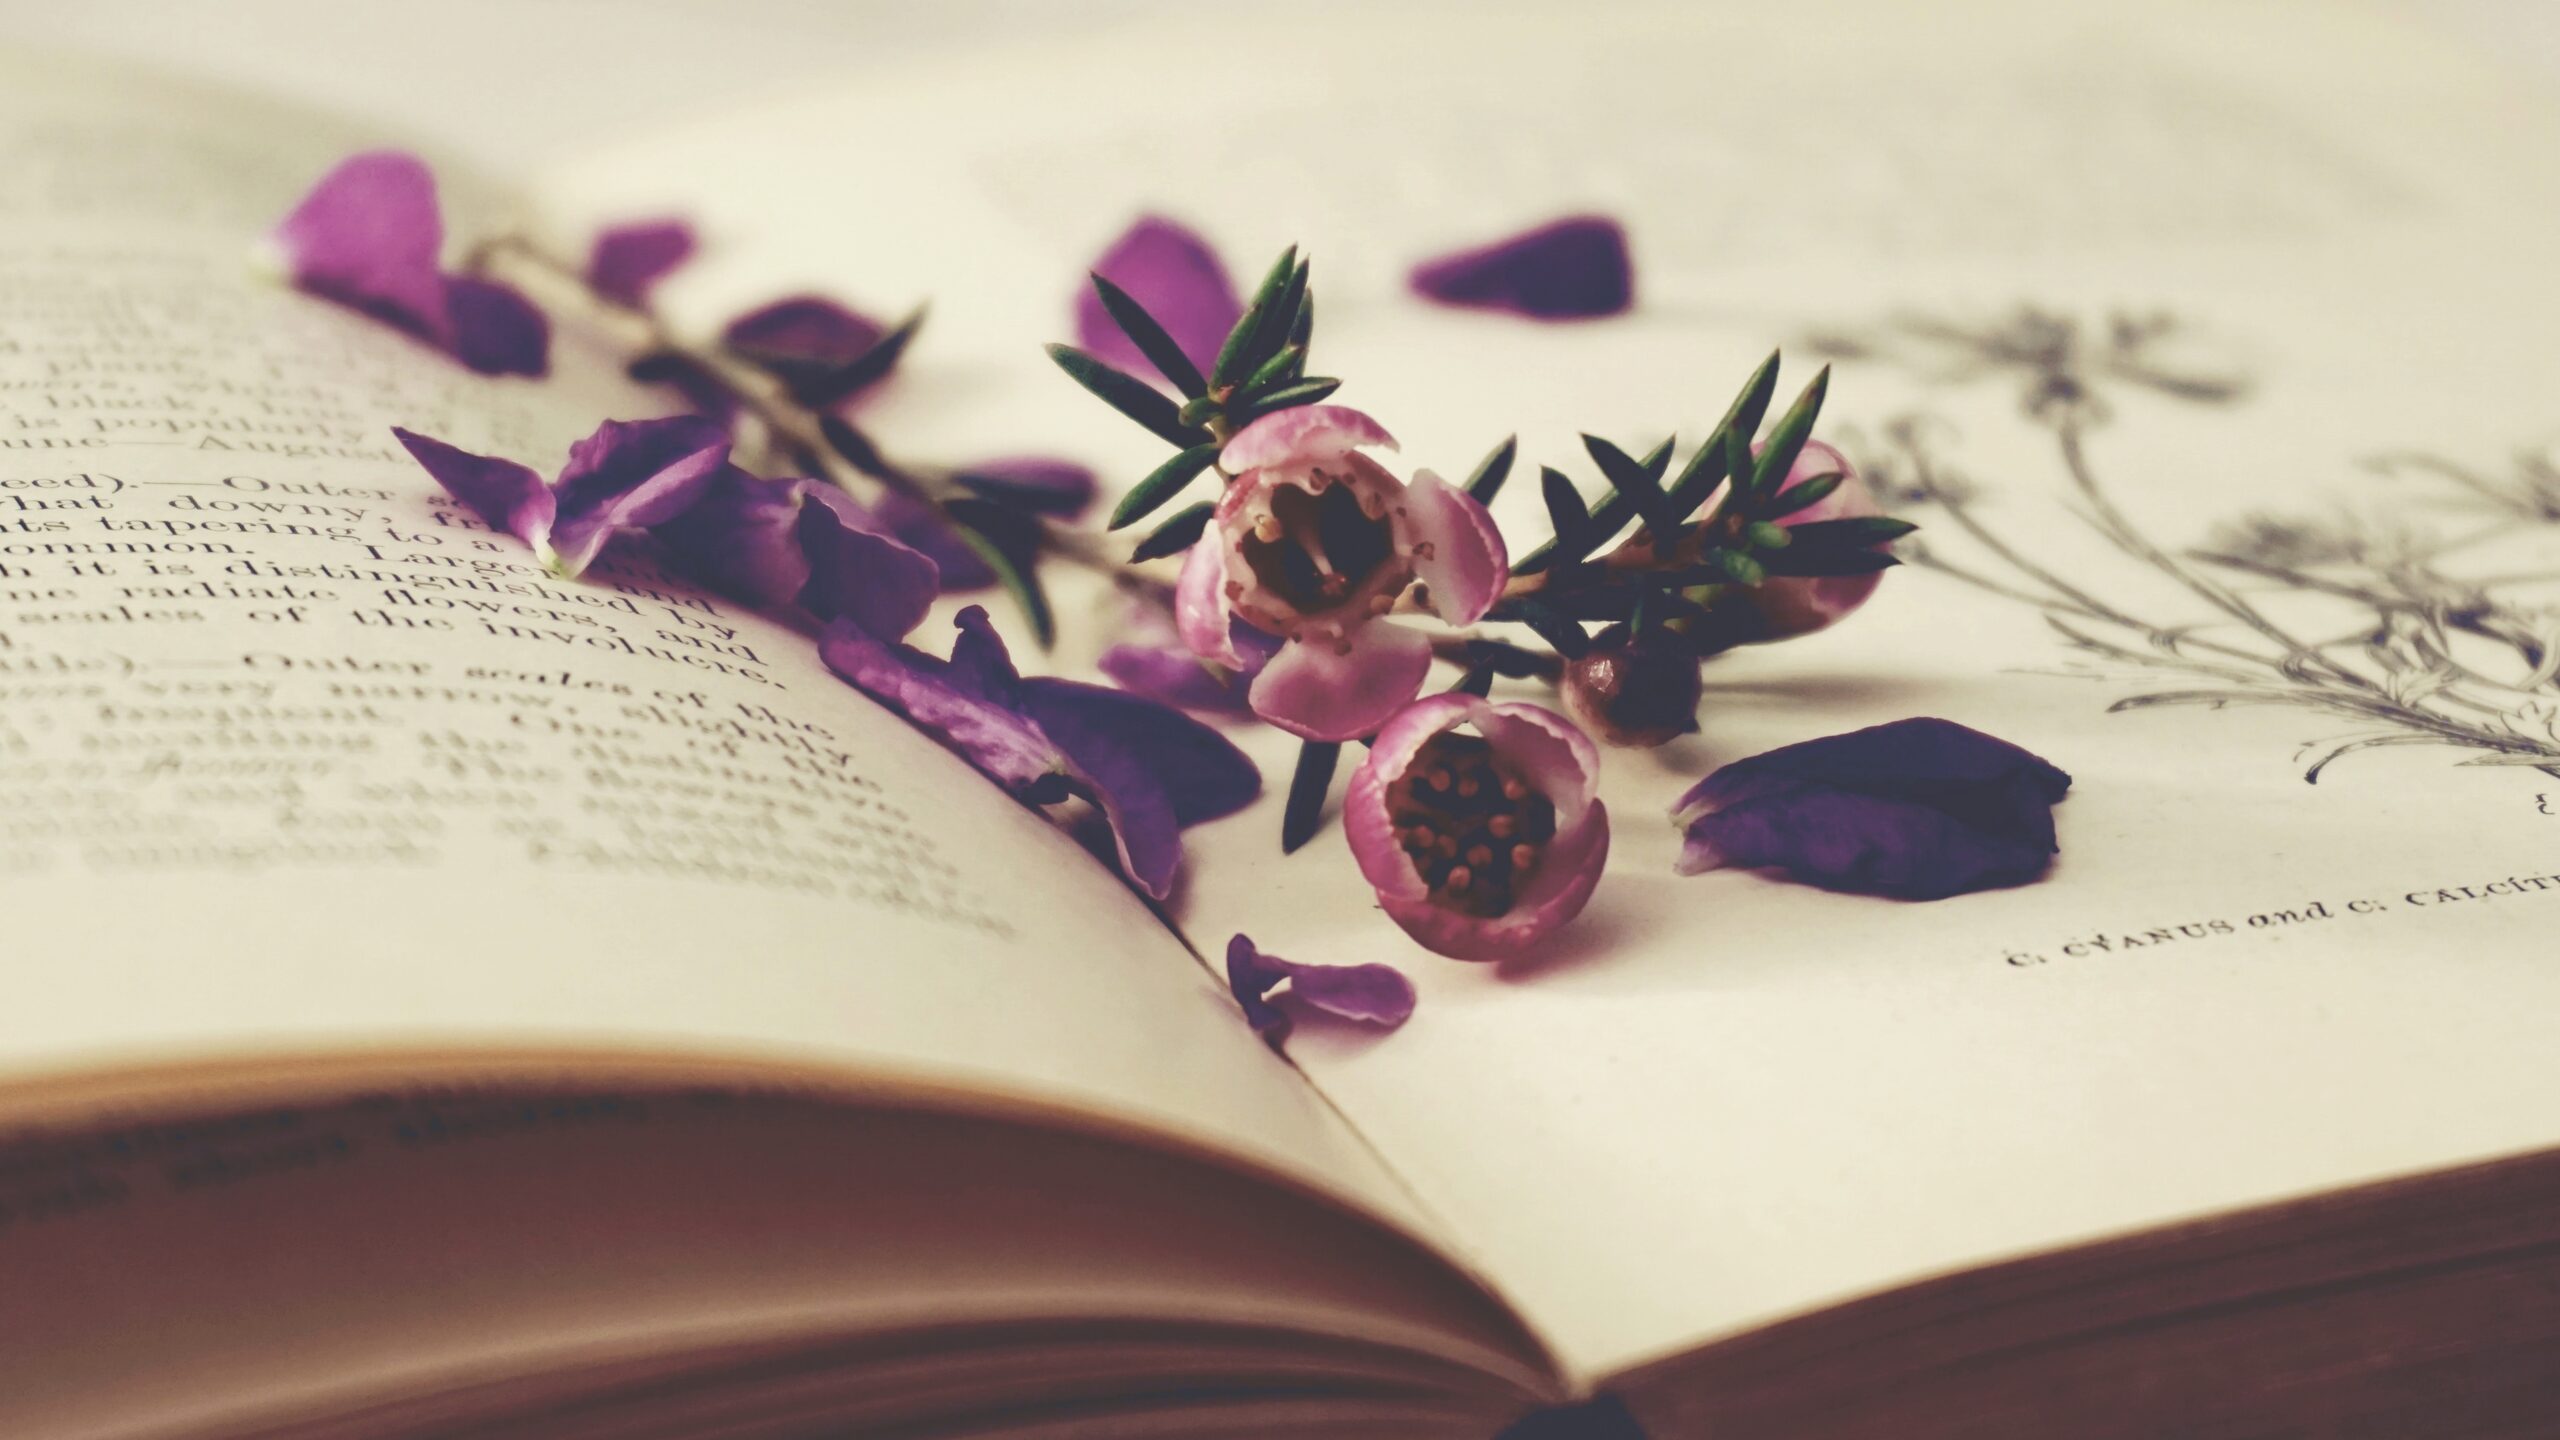 purple flowers laying in an open book. It represents the idea of getting into journaling